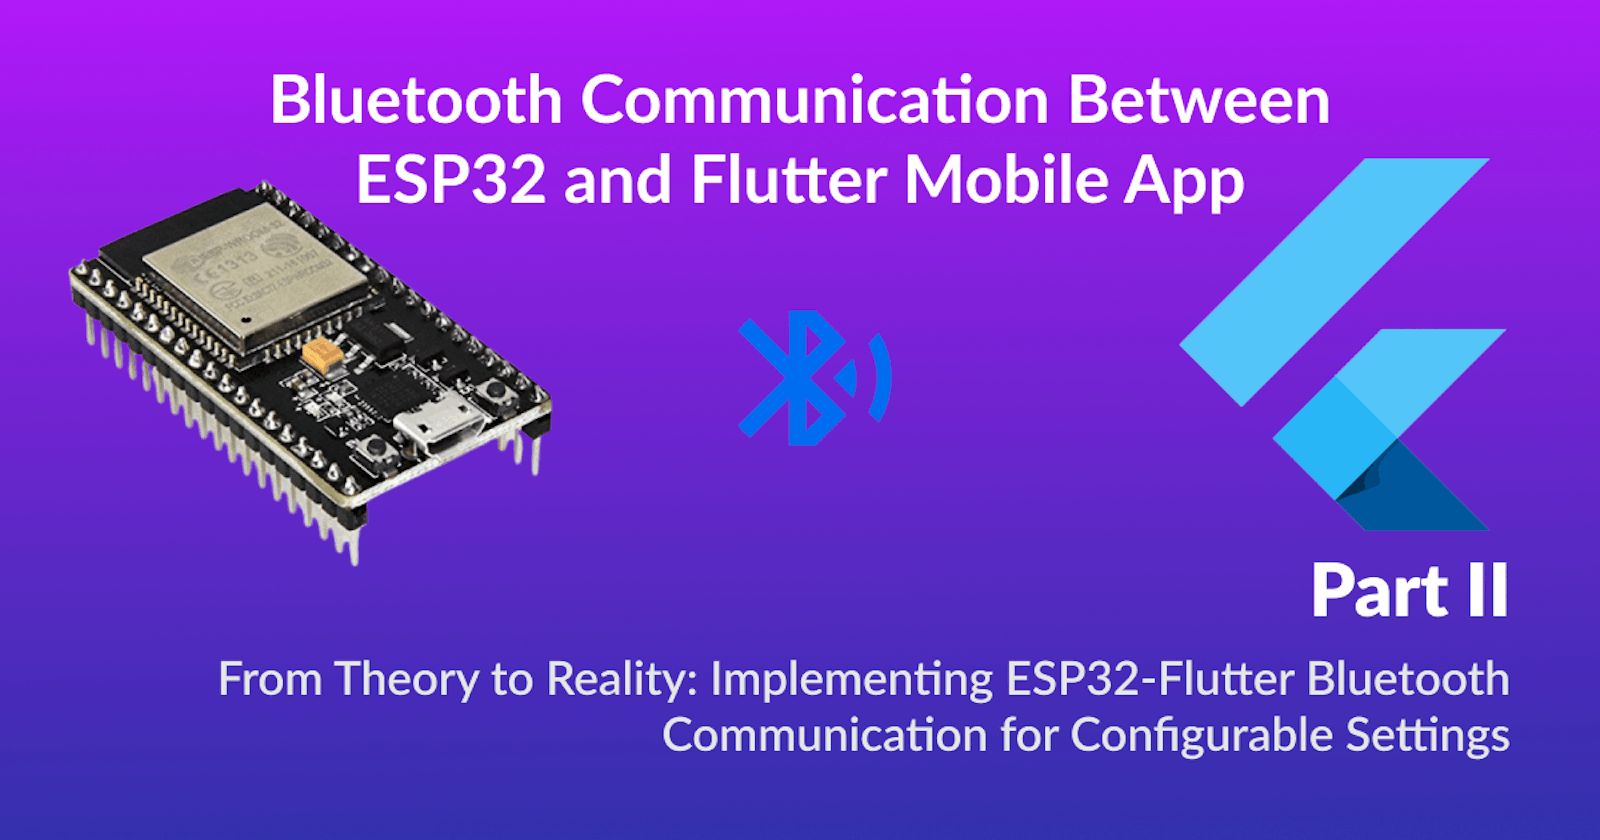 Building a Bluetooth Communication Interface Between ESP32 and Flutter Mobile App for Configurable Settings